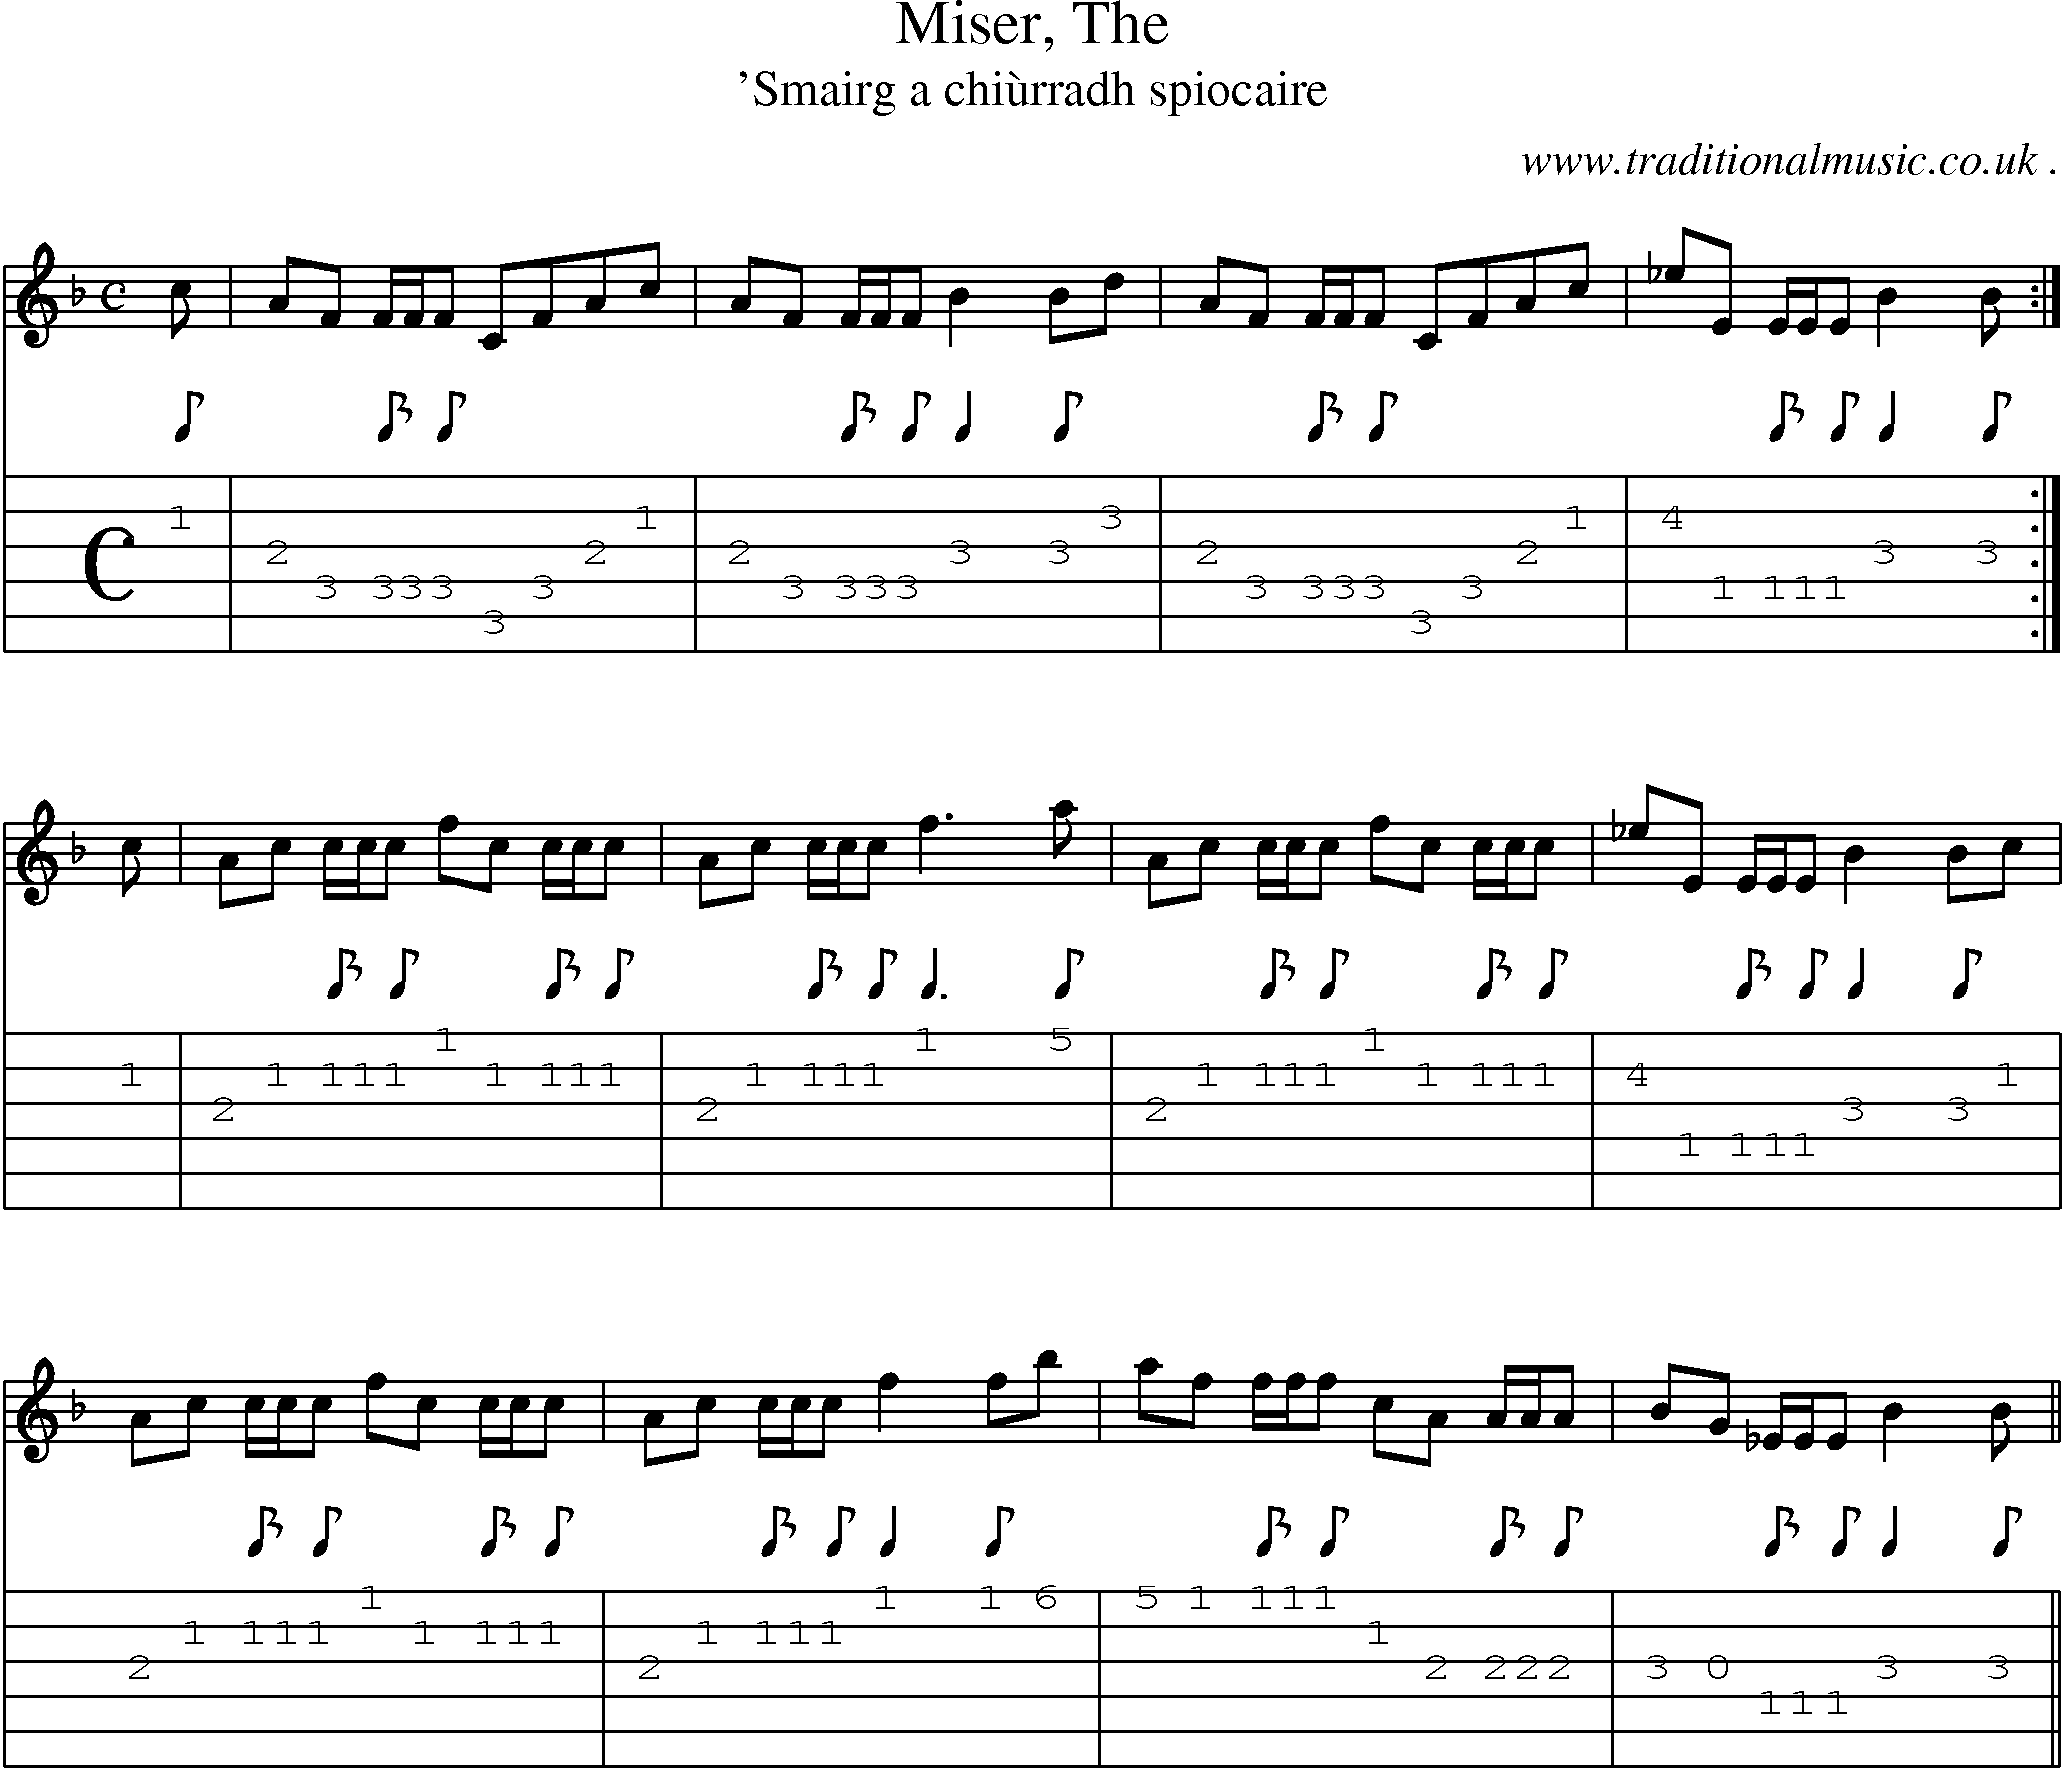 Sheet-music  score, Chords and Guitar Tabs for Miser The